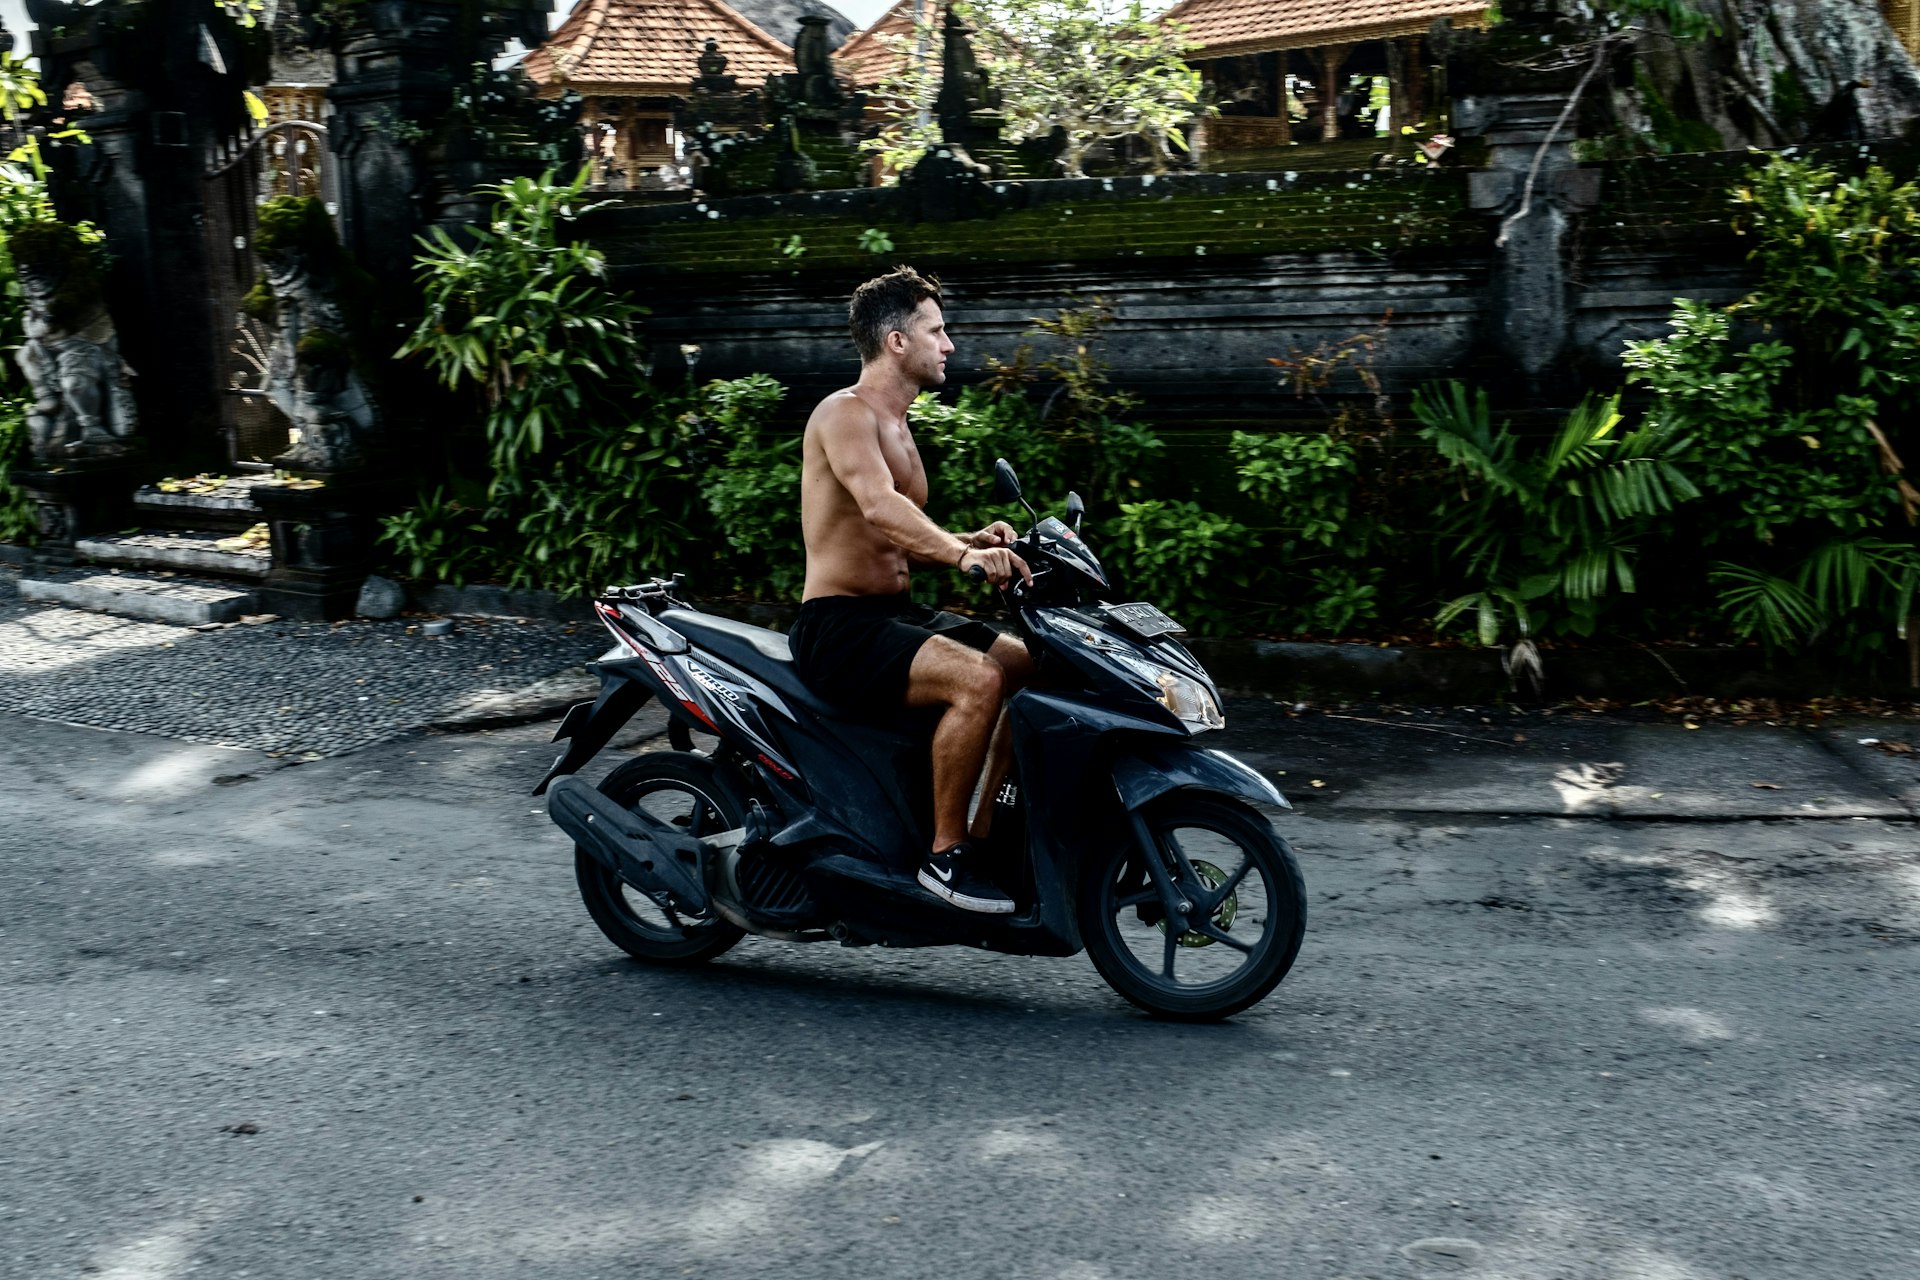 A shirtless man rides a scooter without a helmet in Canggu, Bali, Indonesia